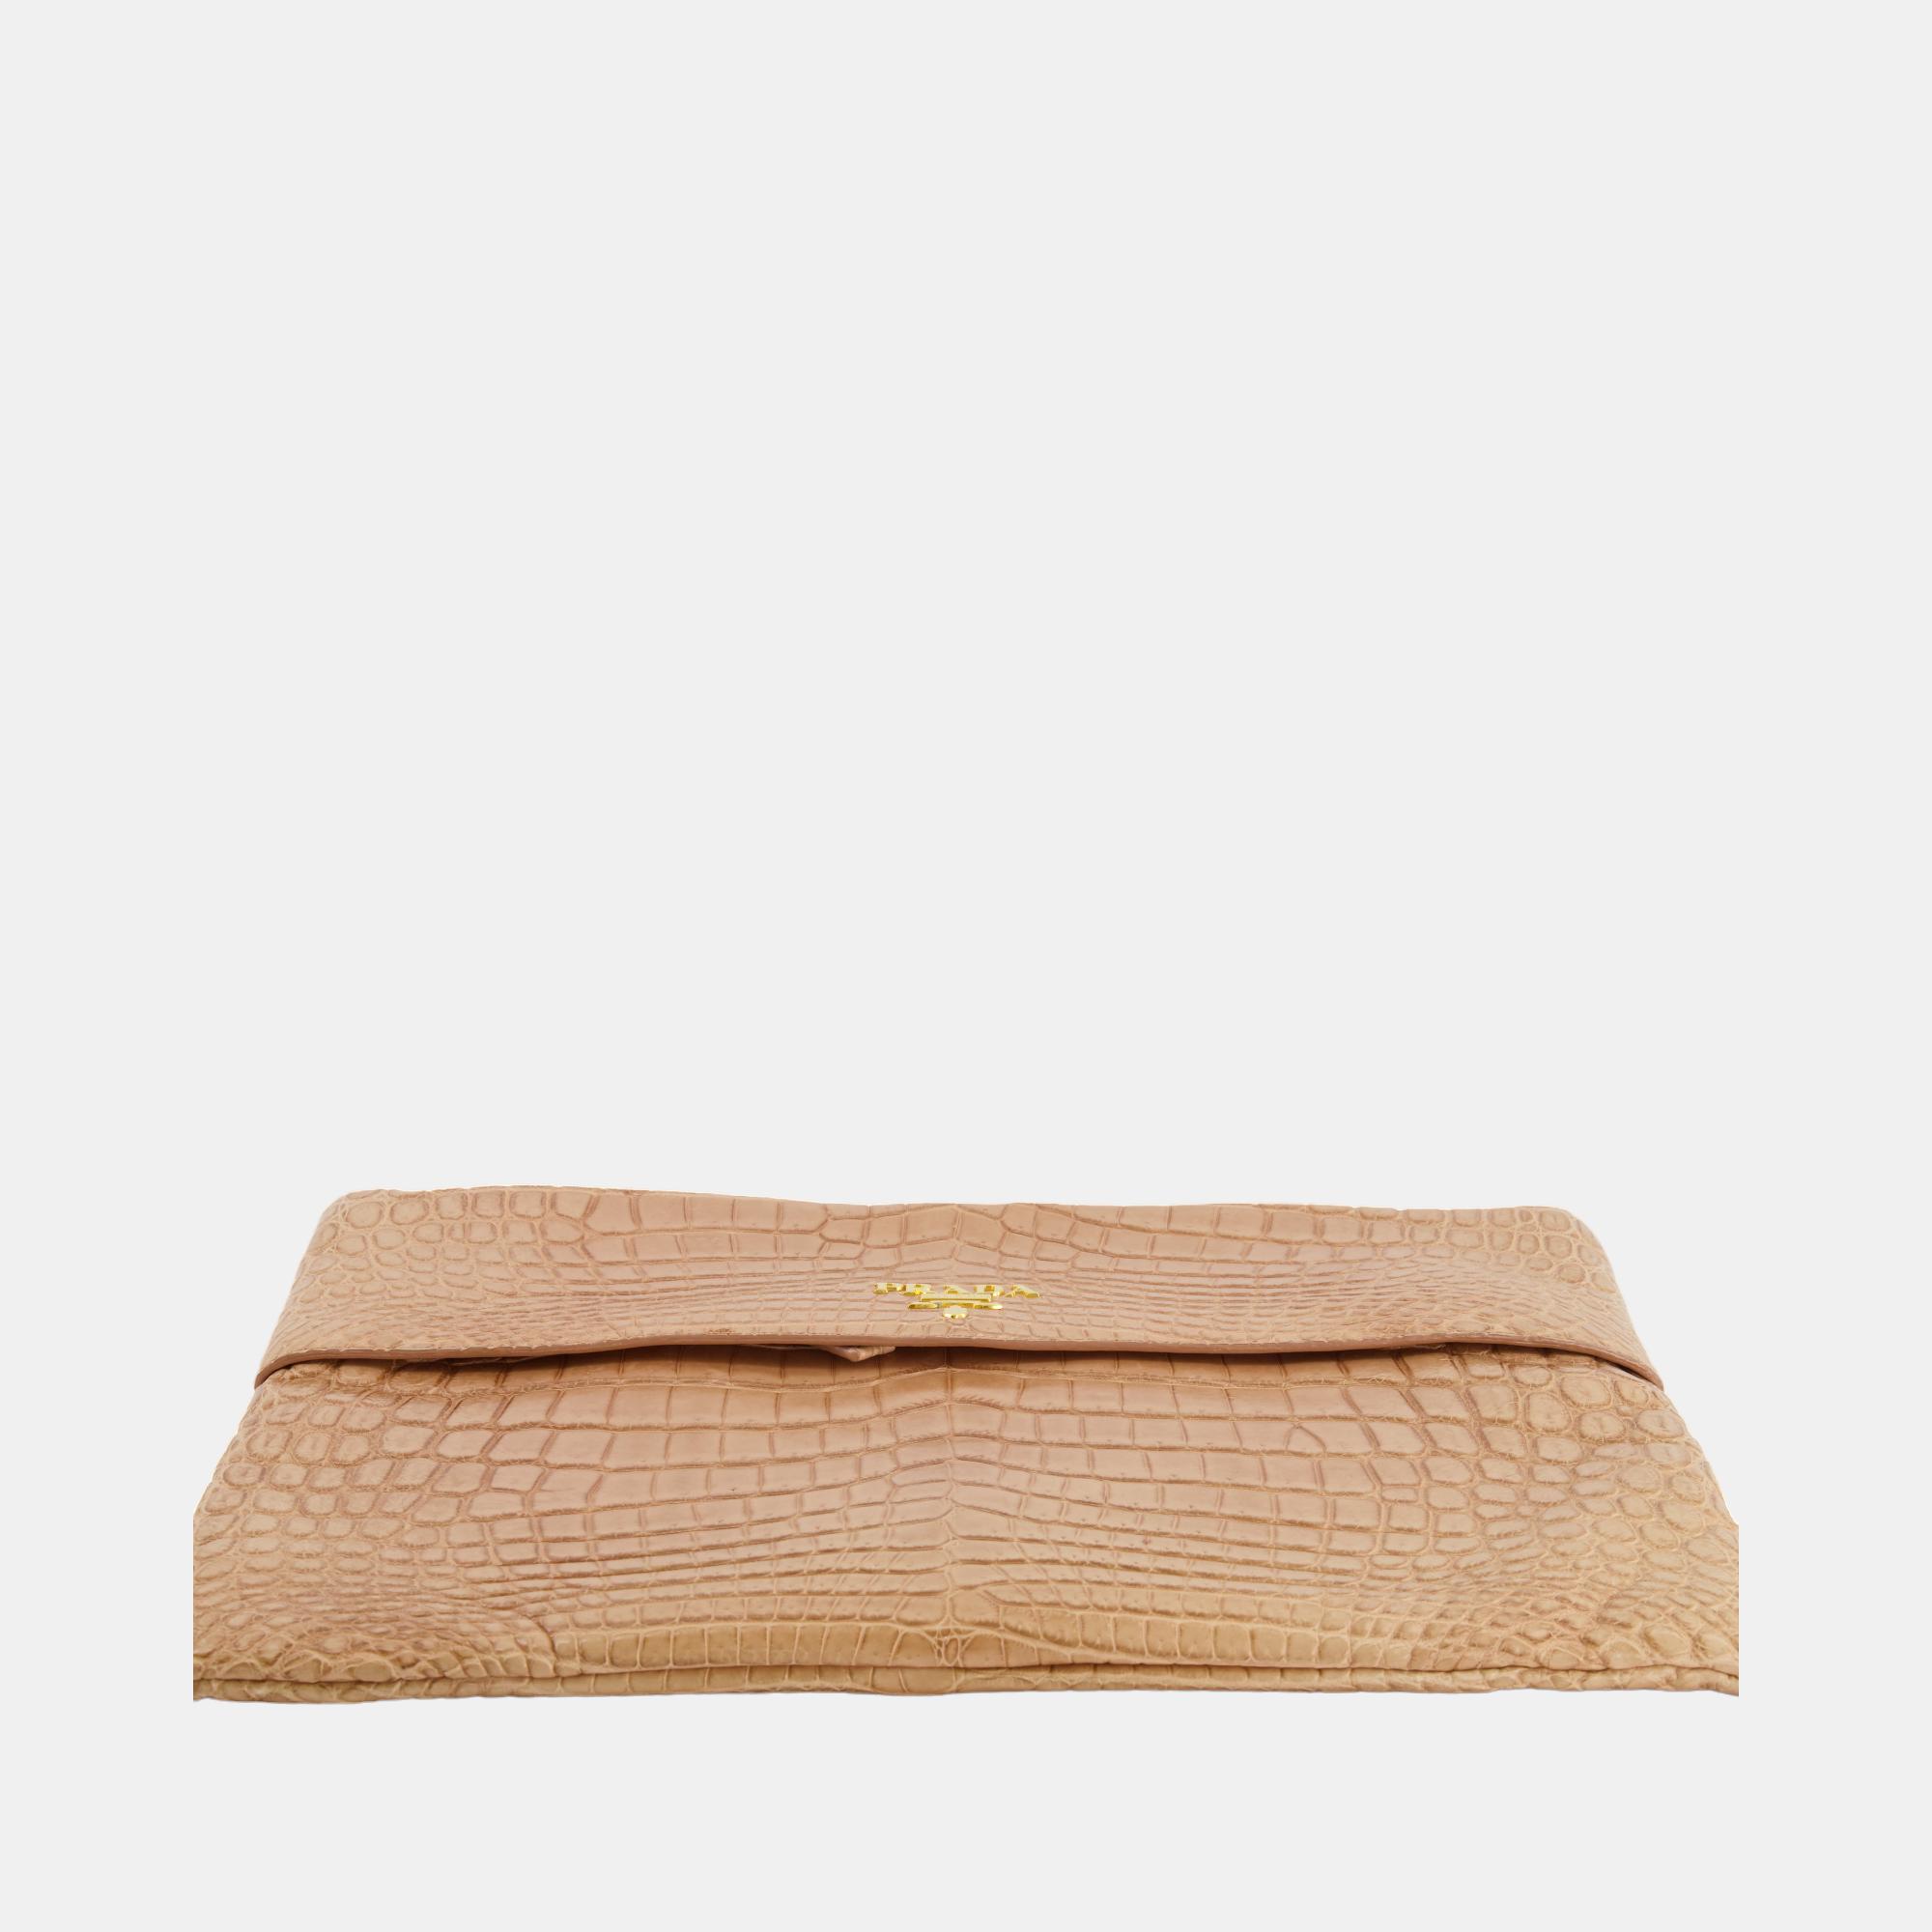 Prada Beige Crocodile Large Pouch Bag With Gold Hardware